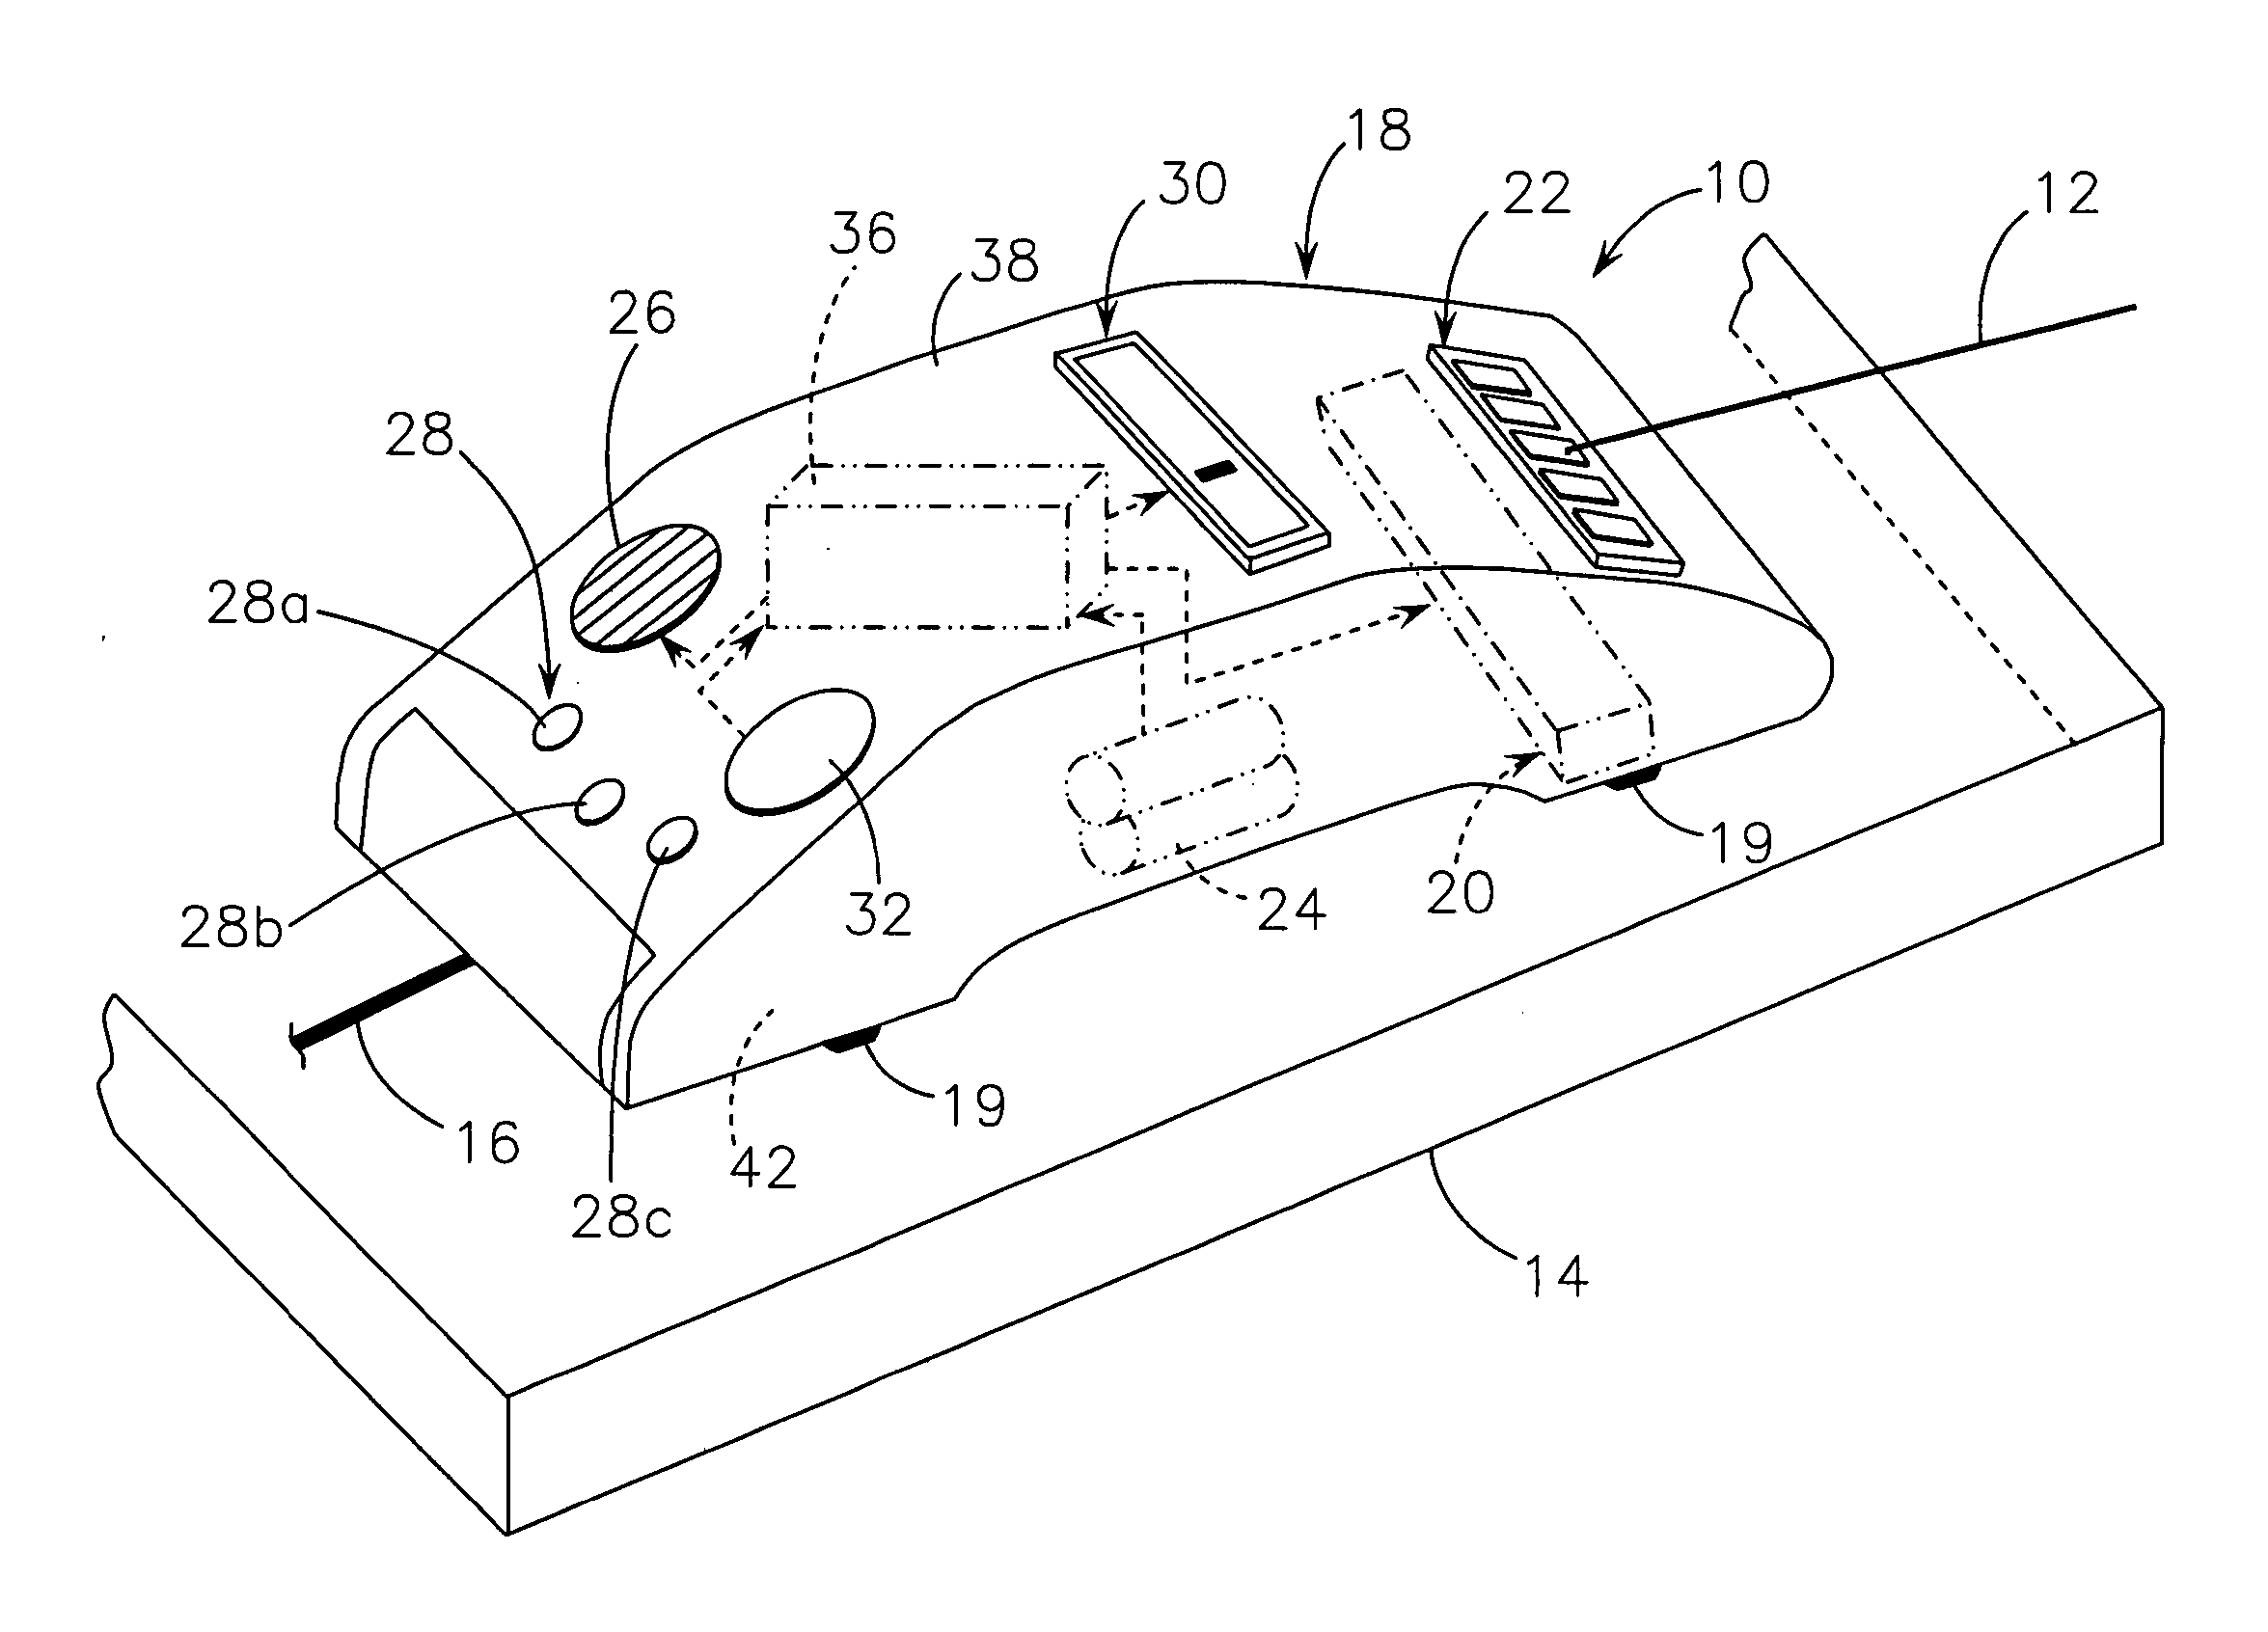 System and method for laser detector with marker